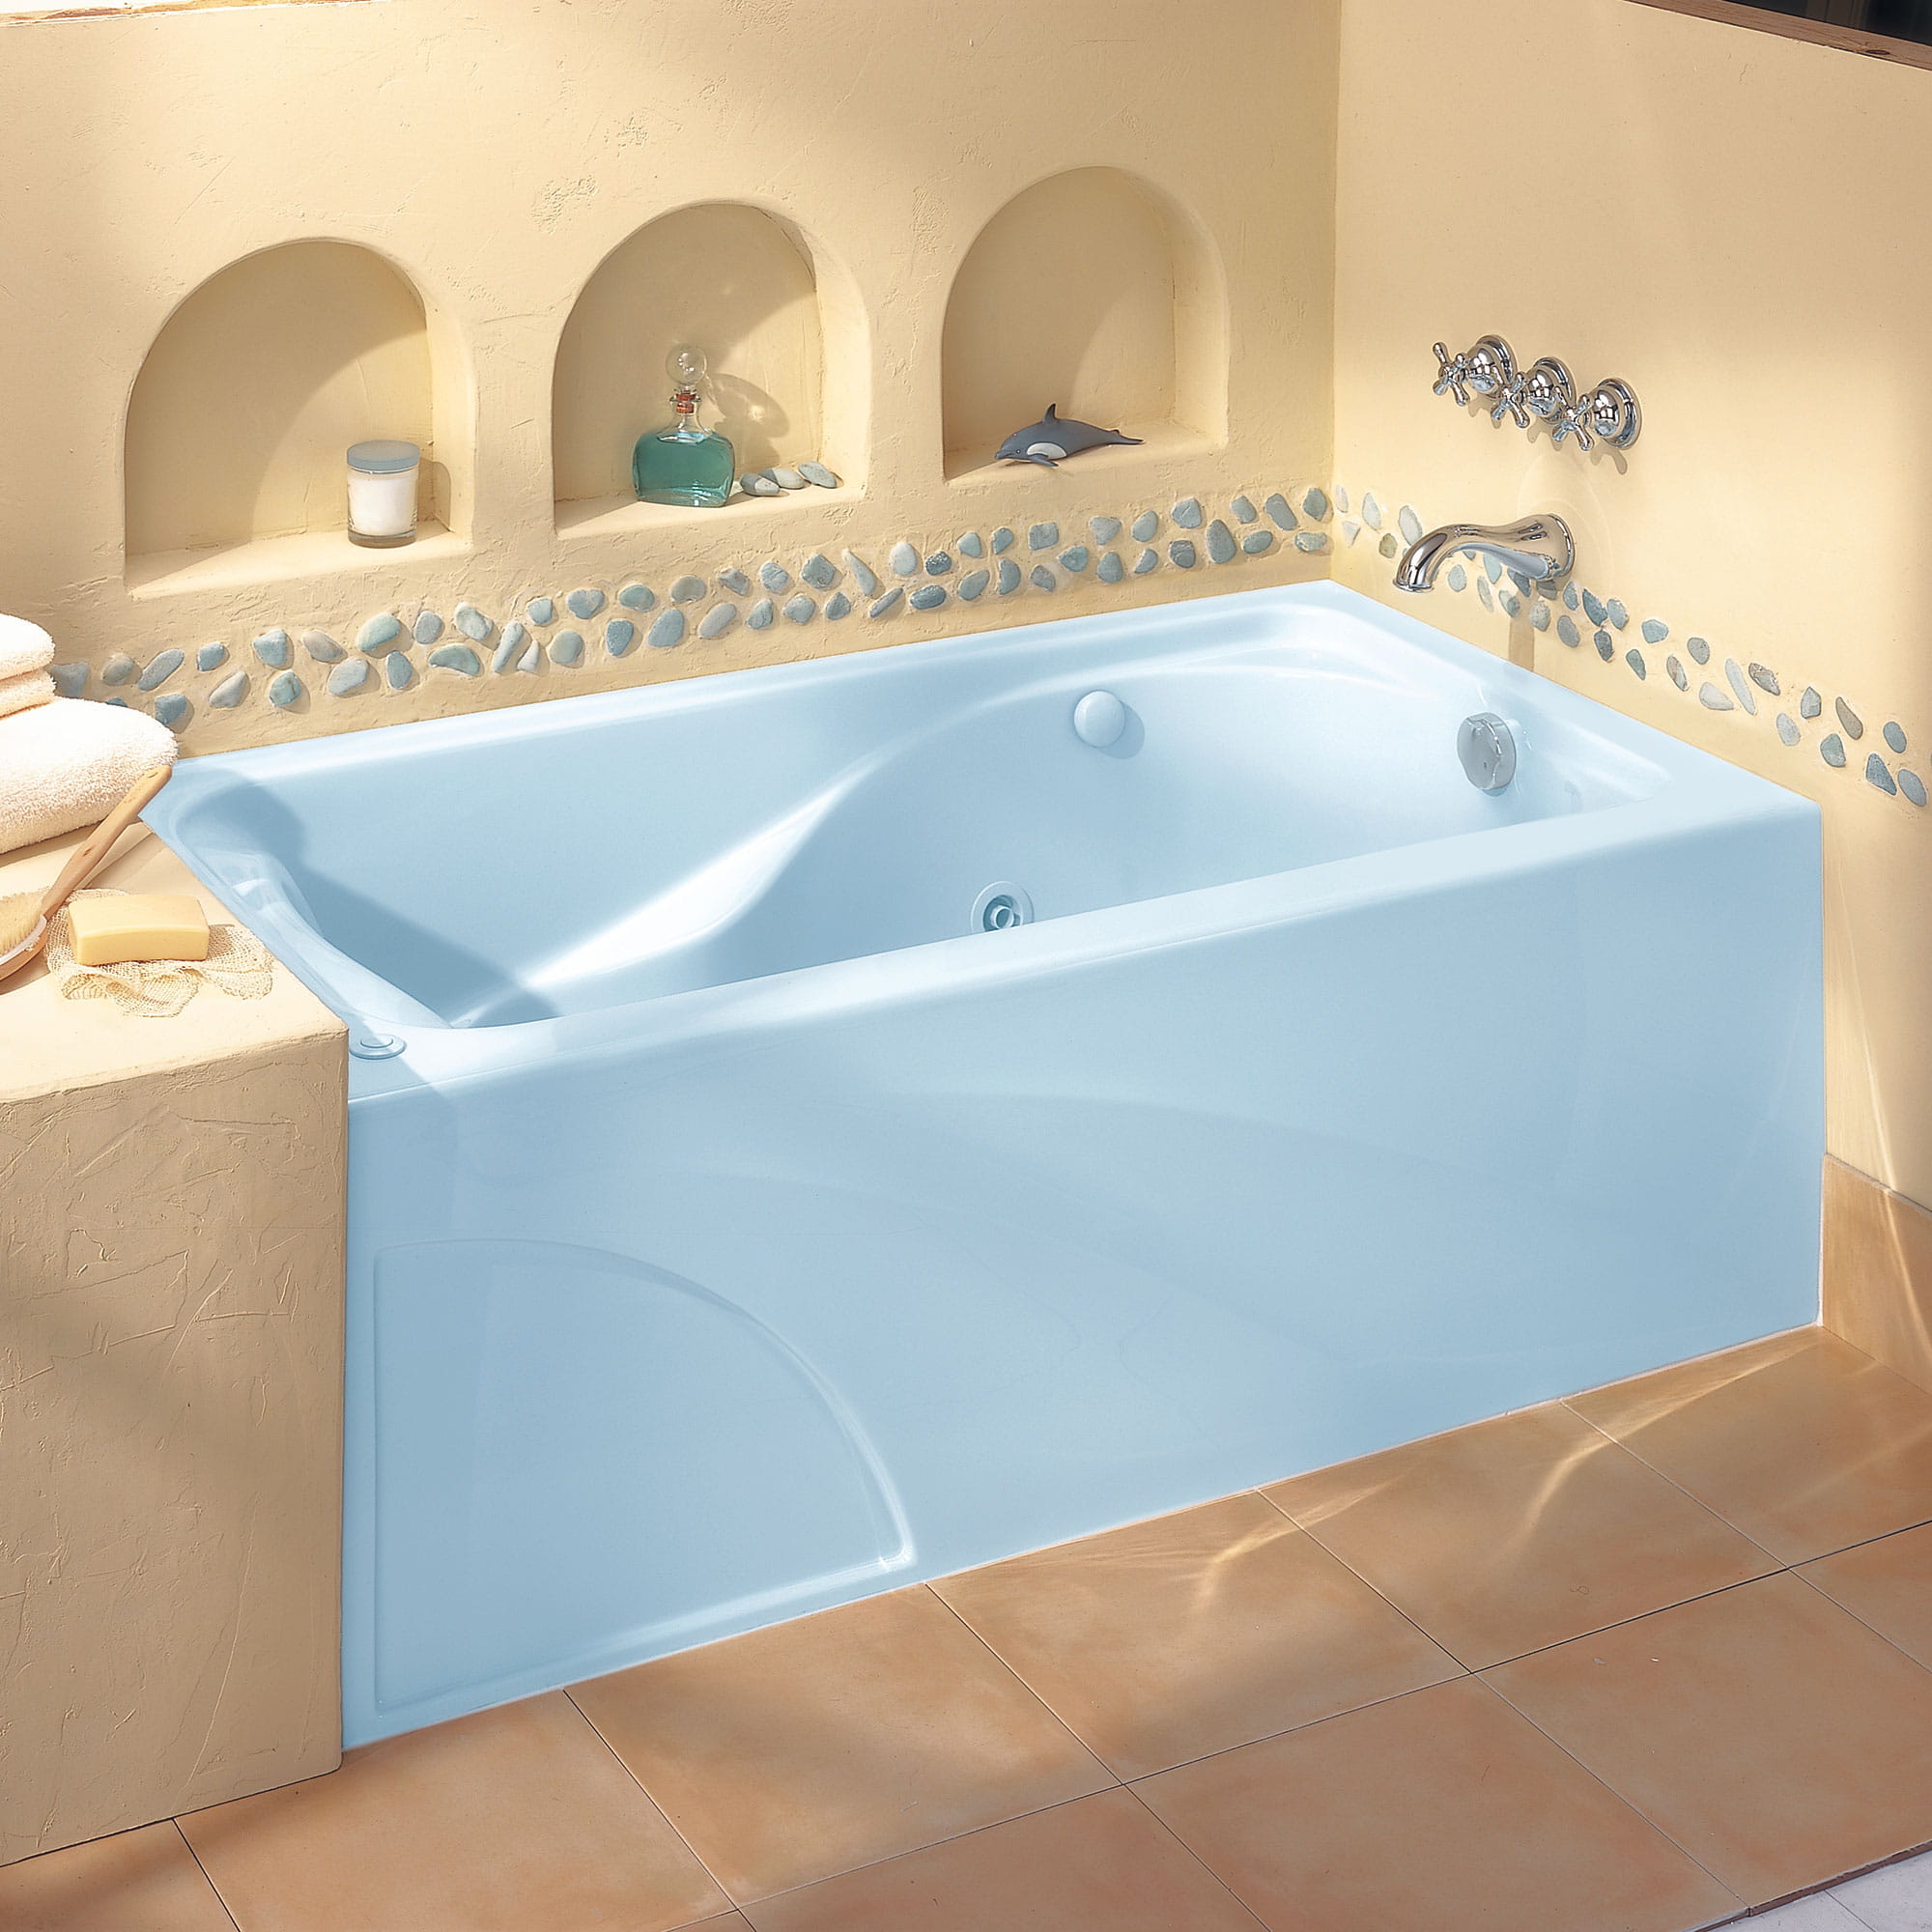 Cadet® 60 x 32-Inch Integral Apron Bathtub Right-Hand Outlet